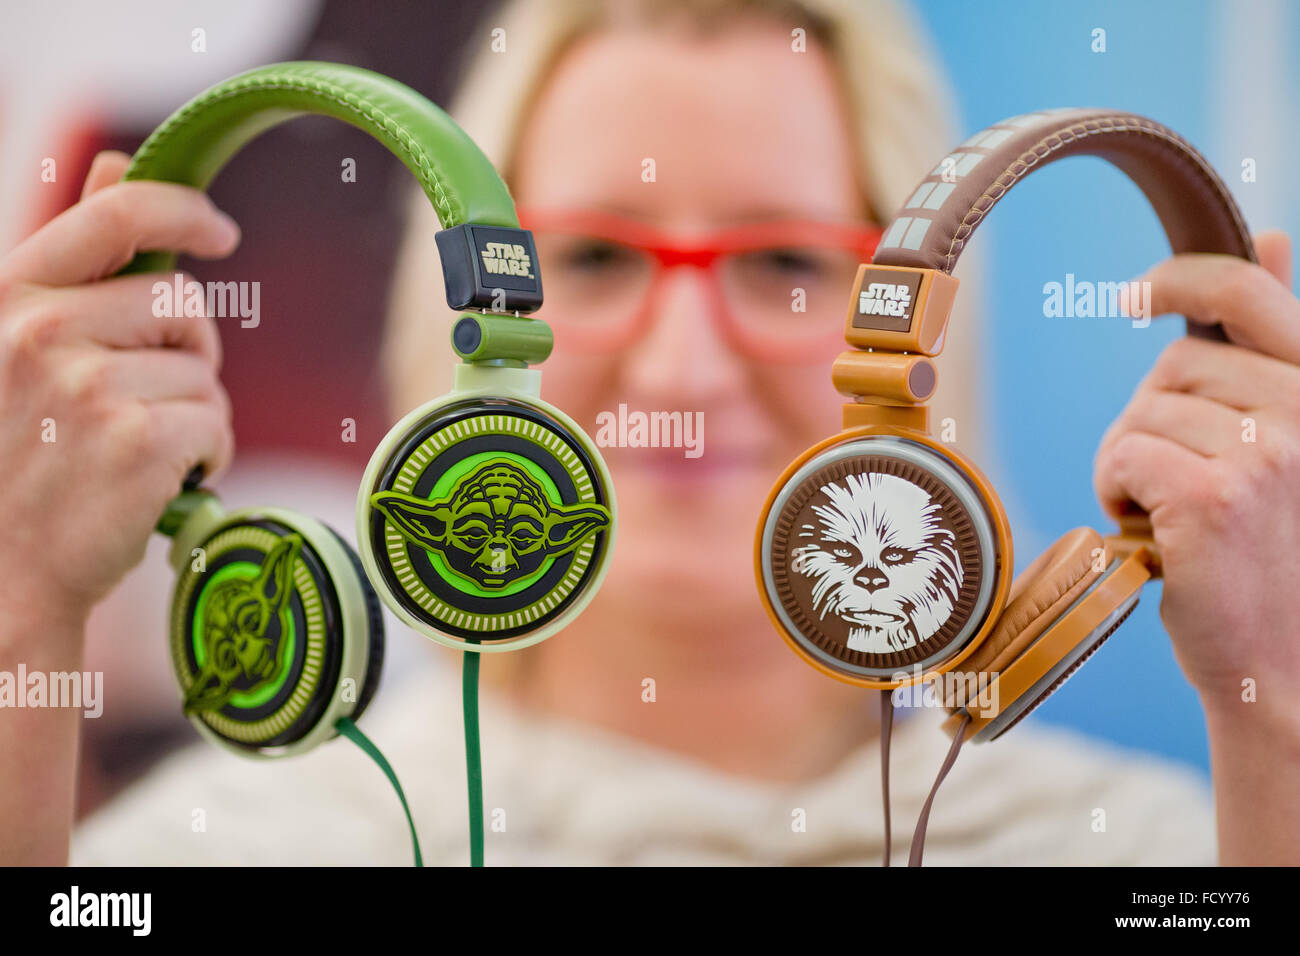 Nuremberg, Germany. 26th Jan, 2016. Headphones by manufacturer Jazwares featuring the Star Wars film characters Yoda (l) and Chewbacca, pictured during the new products show at the 67th international toys trade fair (Spielwarenmesse) in Nuremberg, Germany, 26 January 2016. The world's largest toys trade fair runs from 27 January to 1 February 2016. PHOTO: DANIEL KARMANN/DPA/Alamy Live News Stock Photo